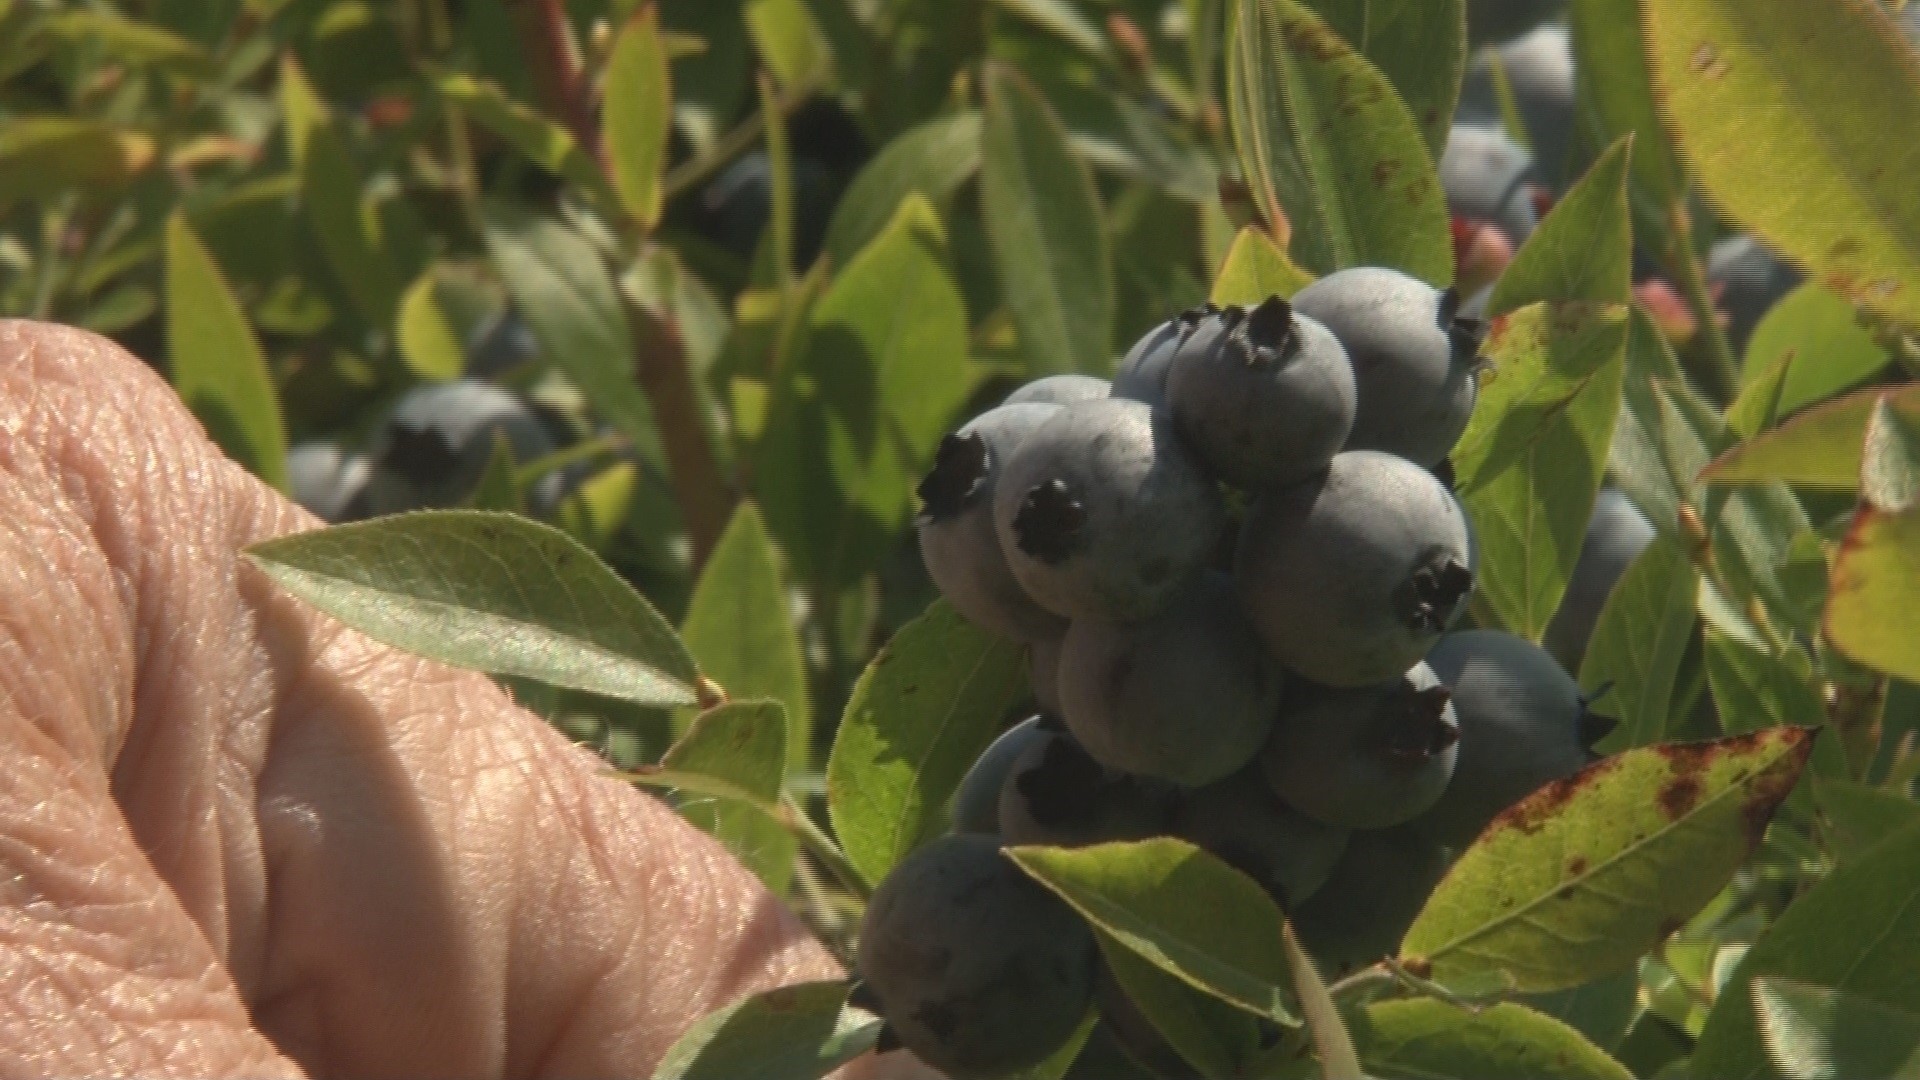 One wild blueberry farm in Pittston lost about 75 to 80 percent of its crop.